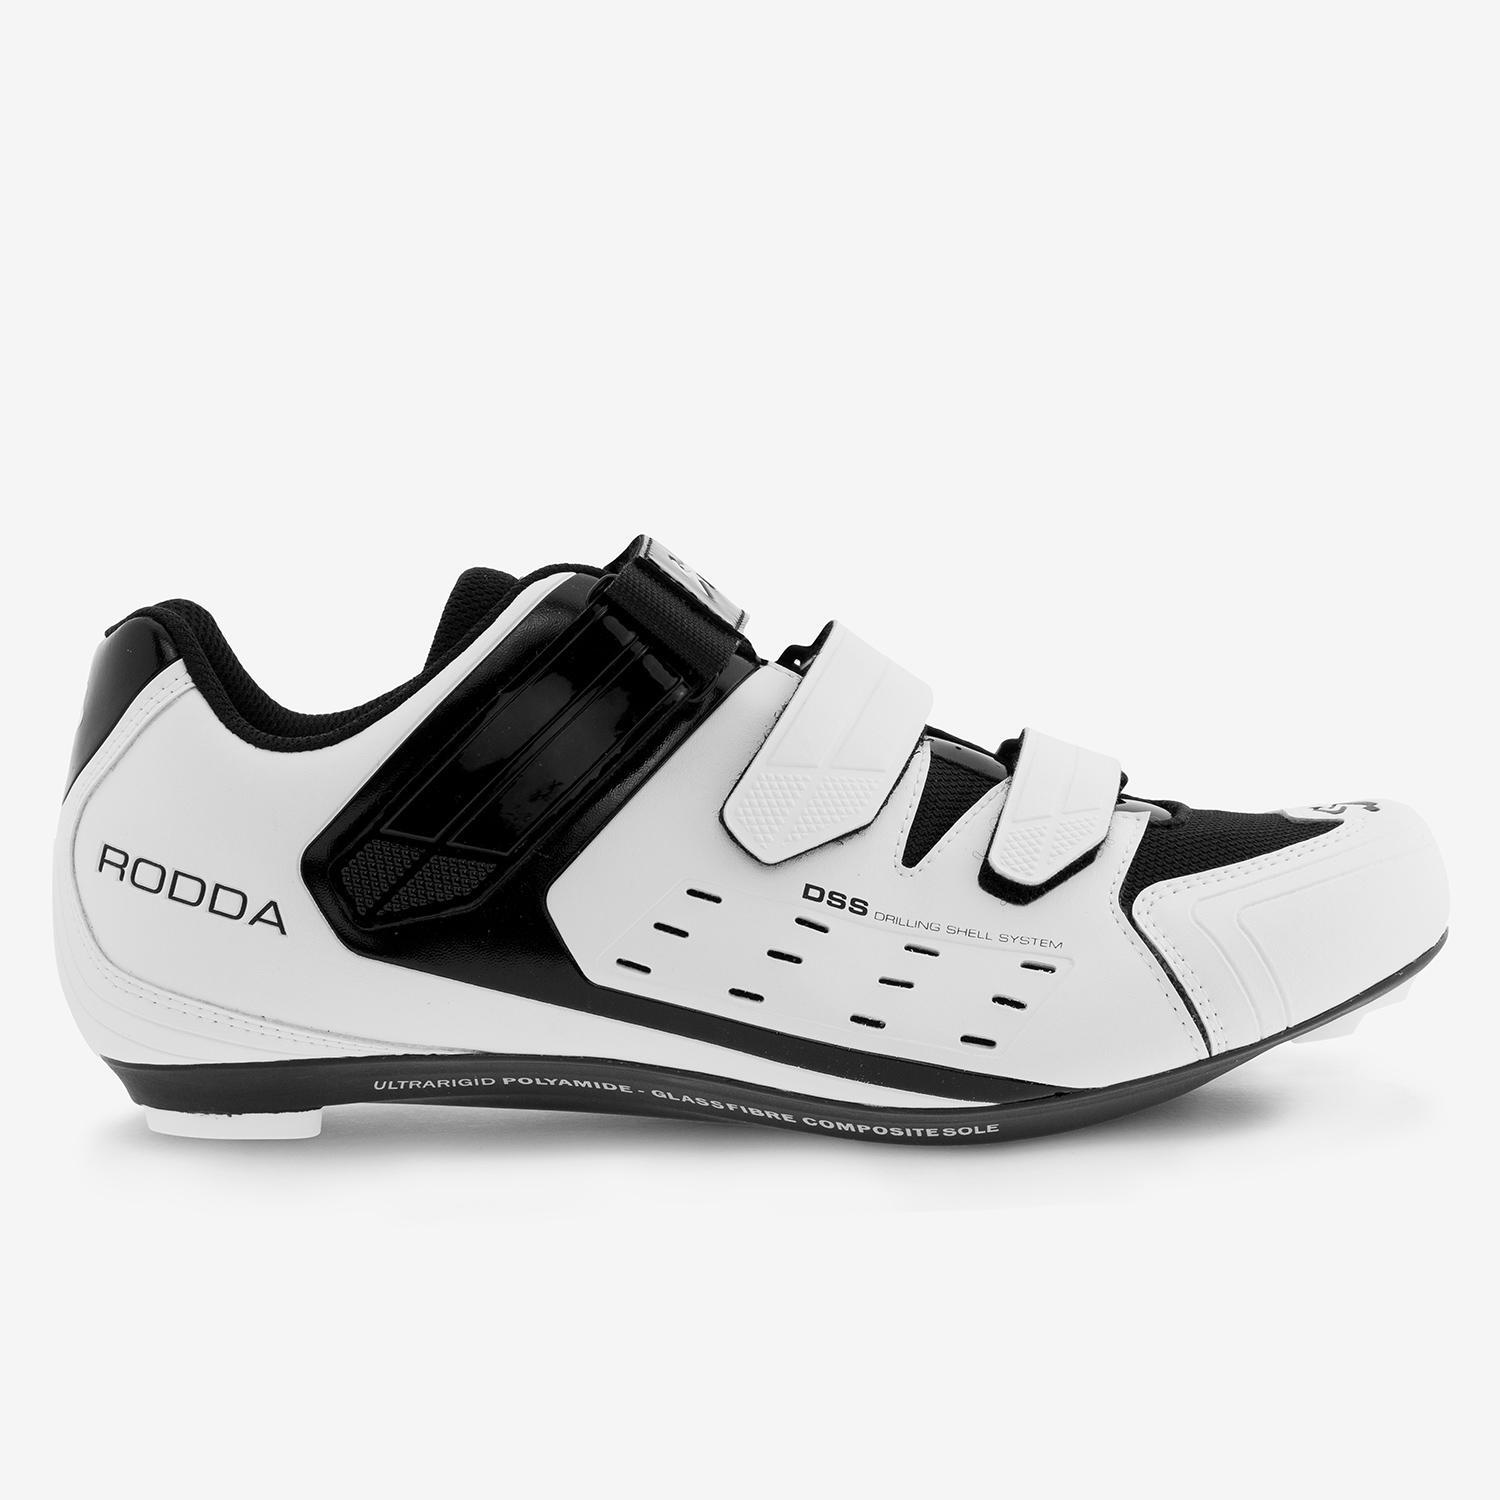 Spiuk Rodda - Blanc - Chaussures Vélo Homme sports taille 41